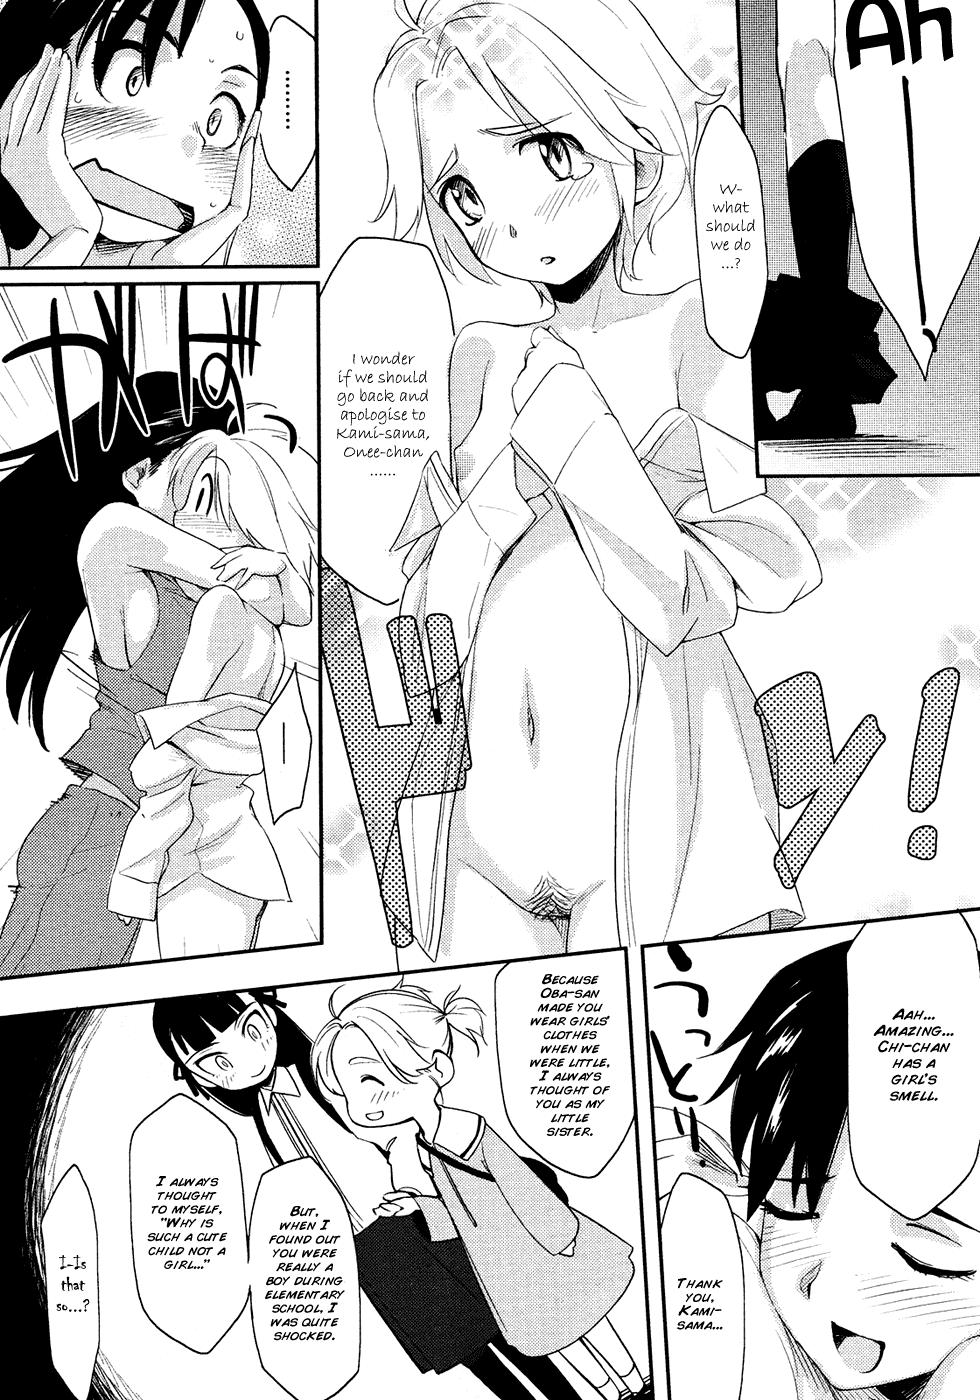 Hot Teen God Bless You!! Hugecock - Page 6